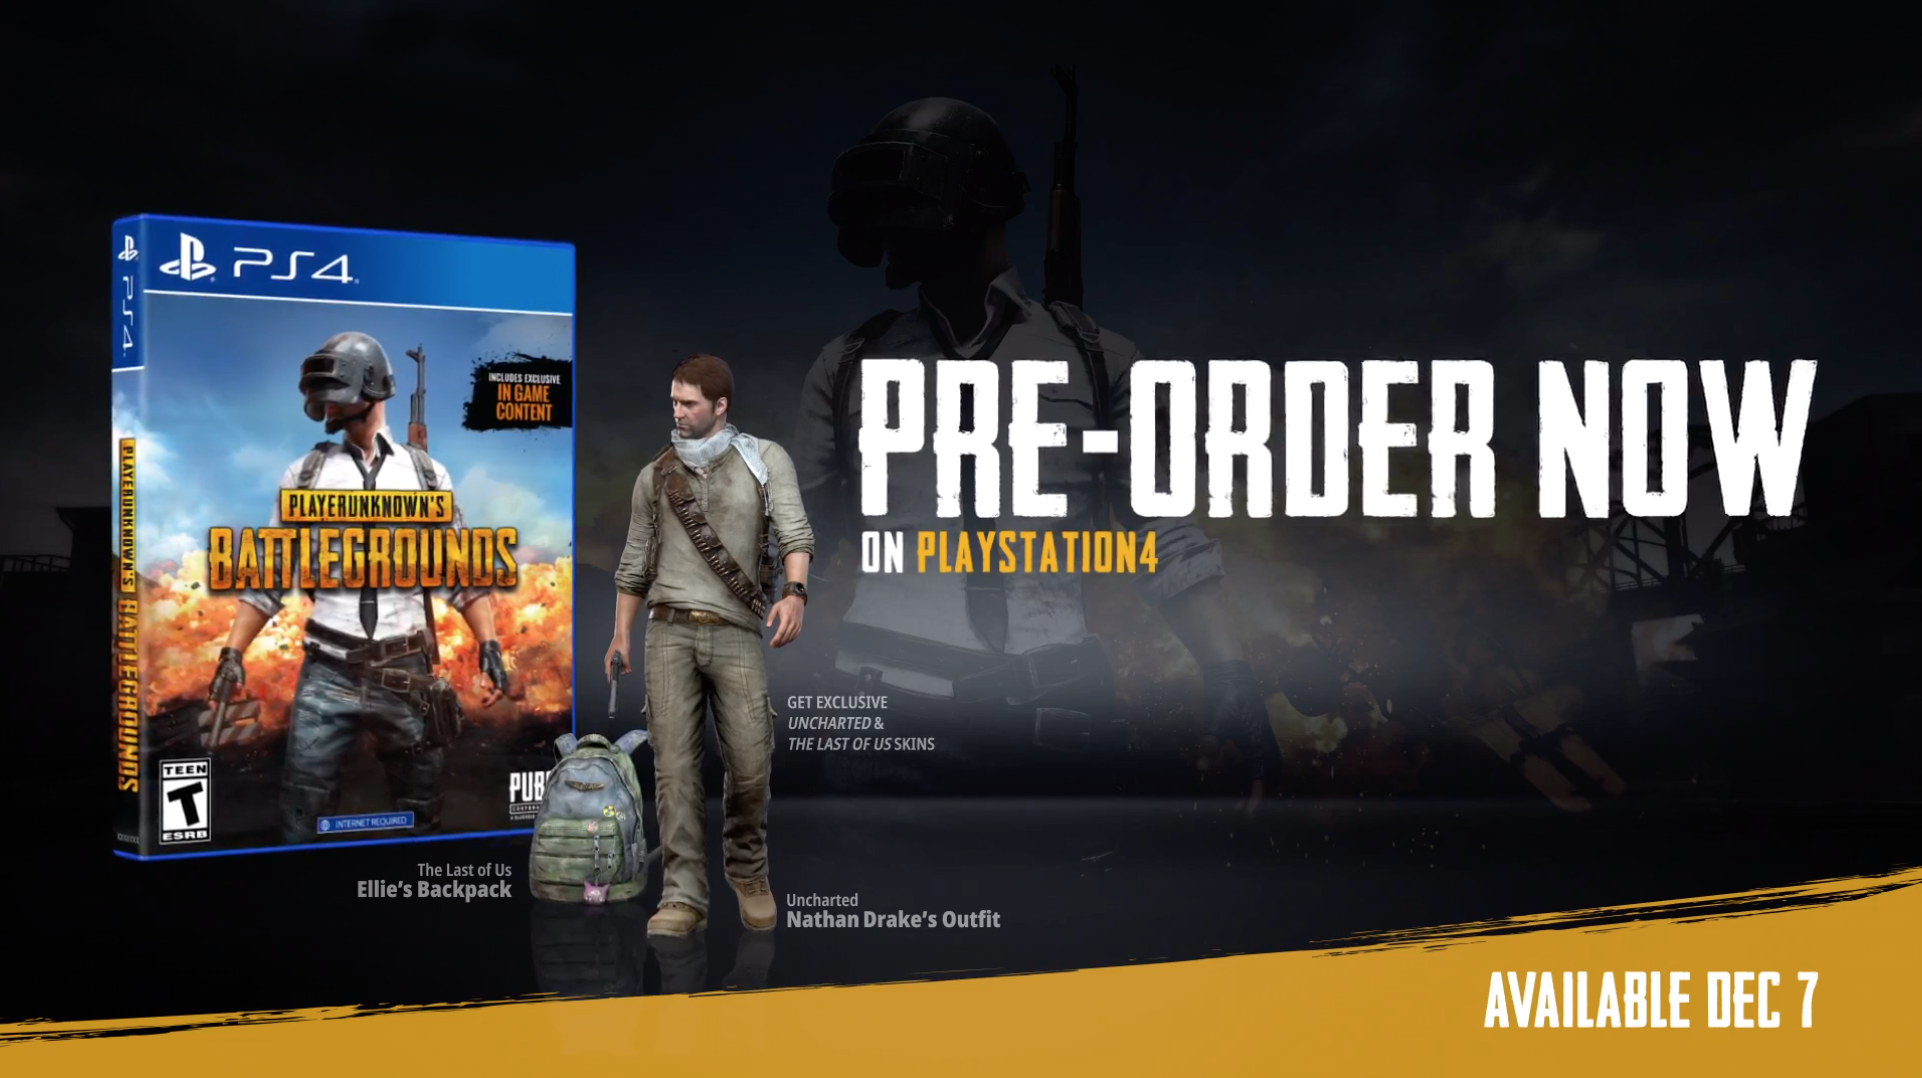 Snestorm overdrive spontan PUBG's “console exclusivity” ends, PS4 version out on Dec. 7 [Updated] |  Ars Technica